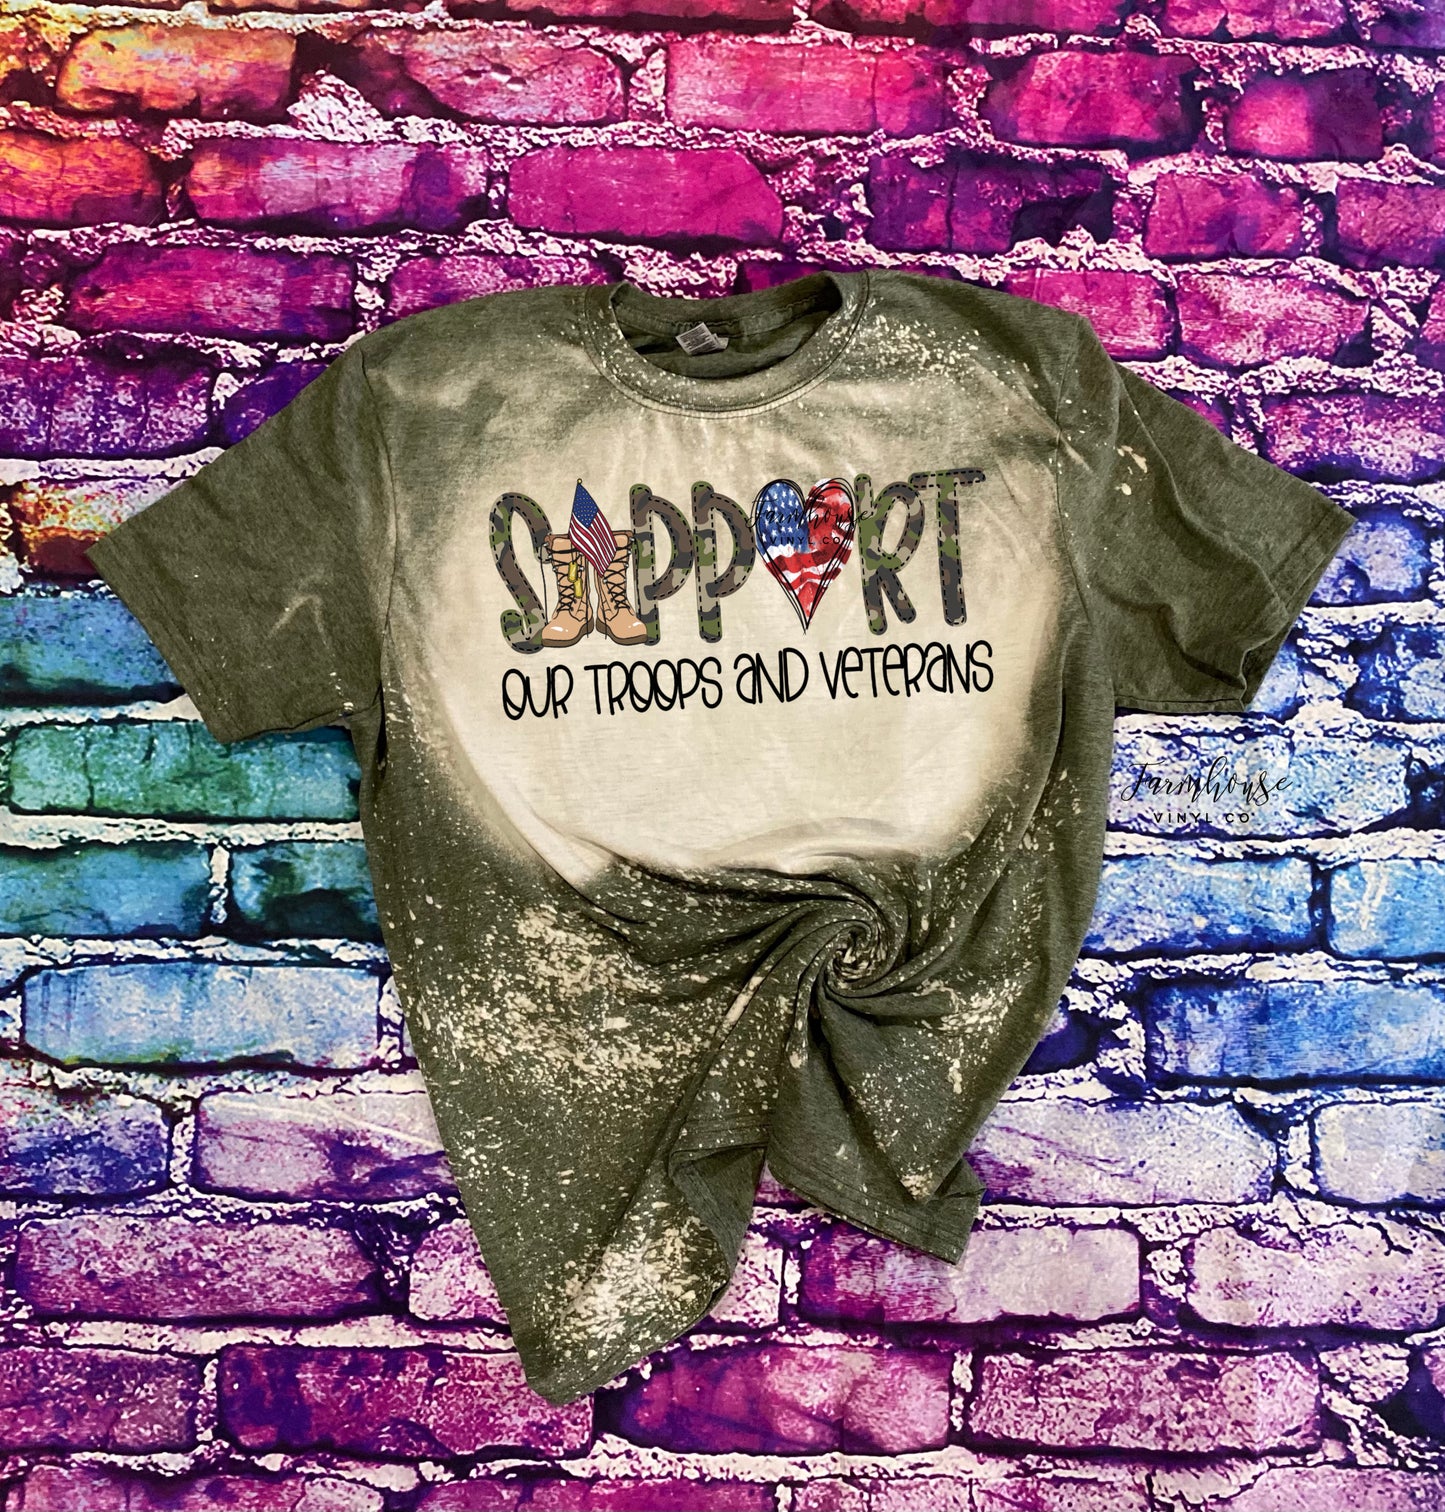 Support Our Troops Shirts - Farmhouse Vinyl Co